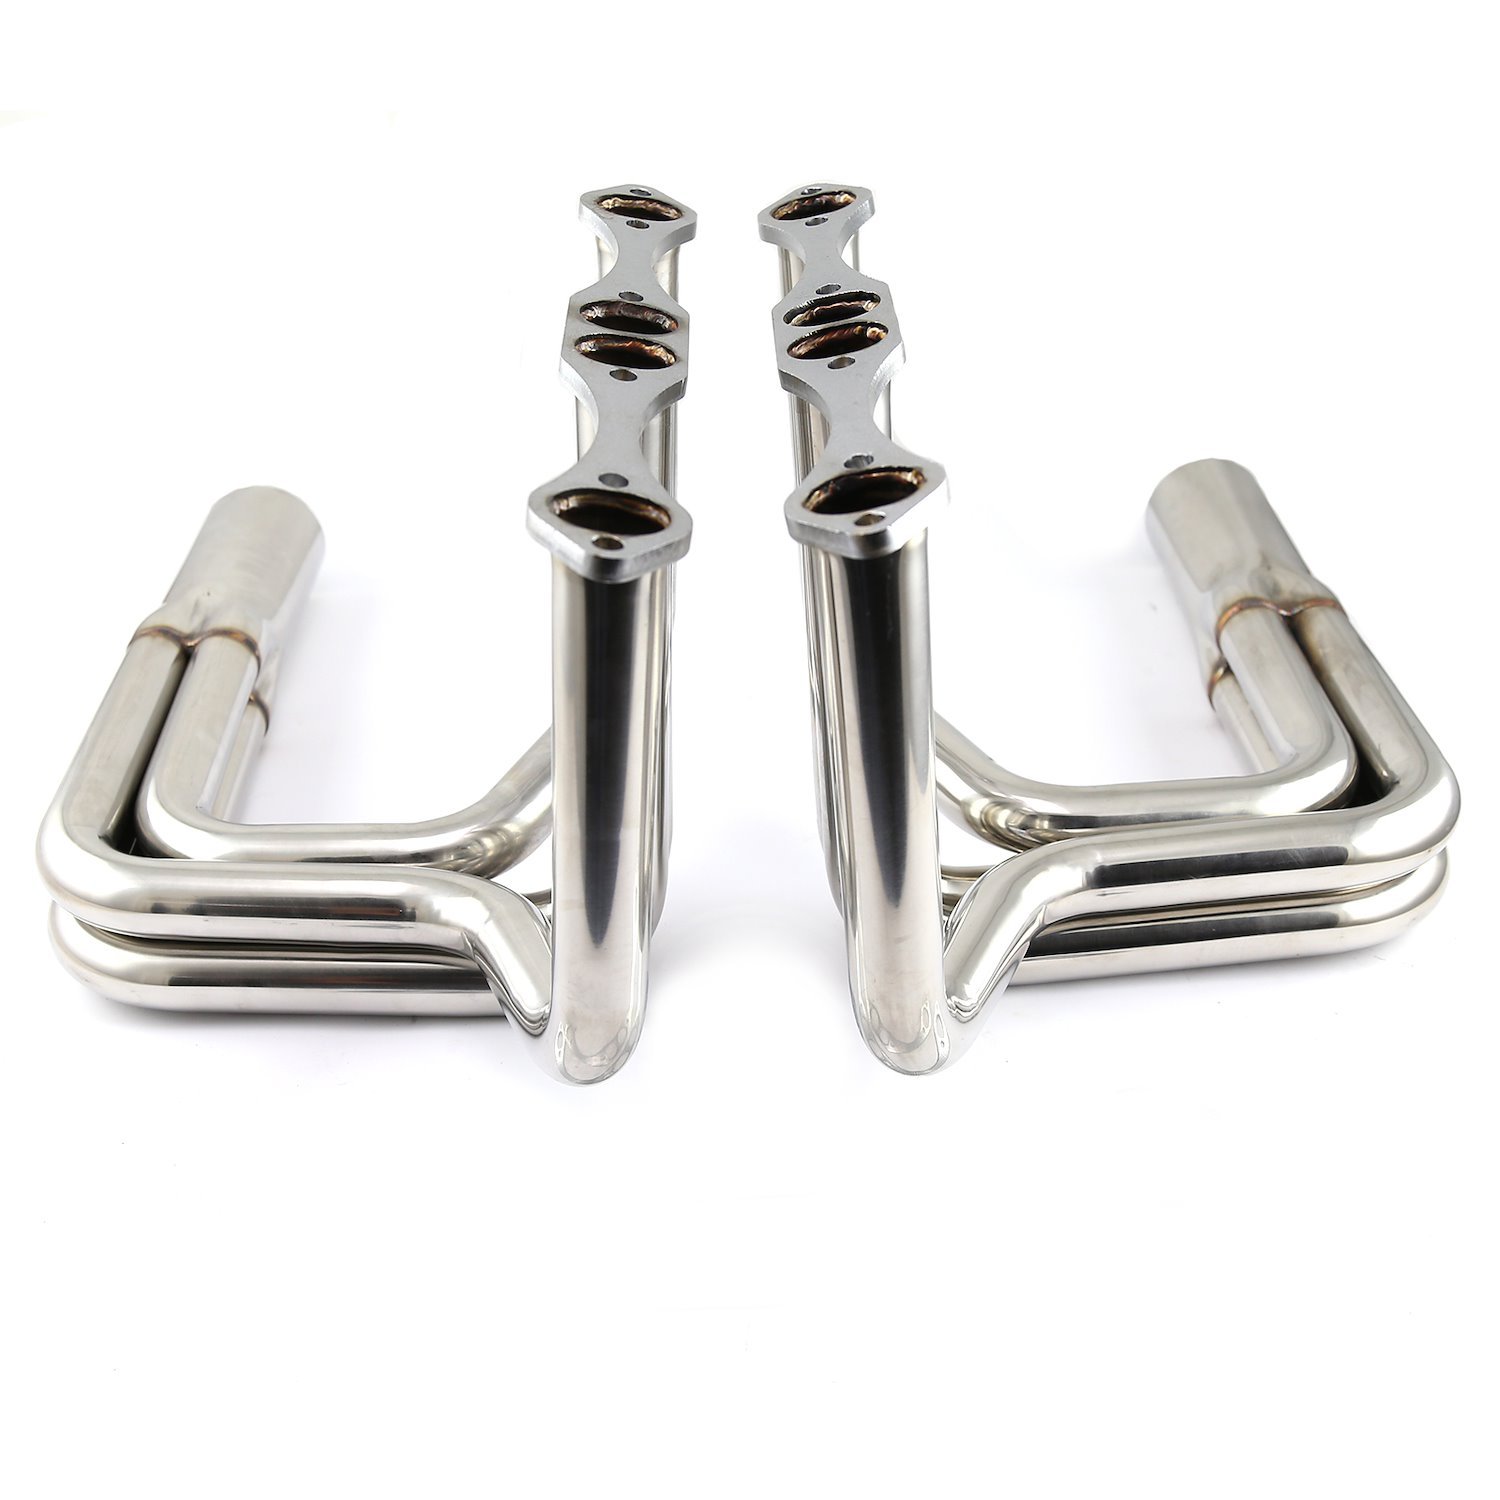 Chevy SBC 350 1932 Hi-Boy Stainless Steel Exhaust